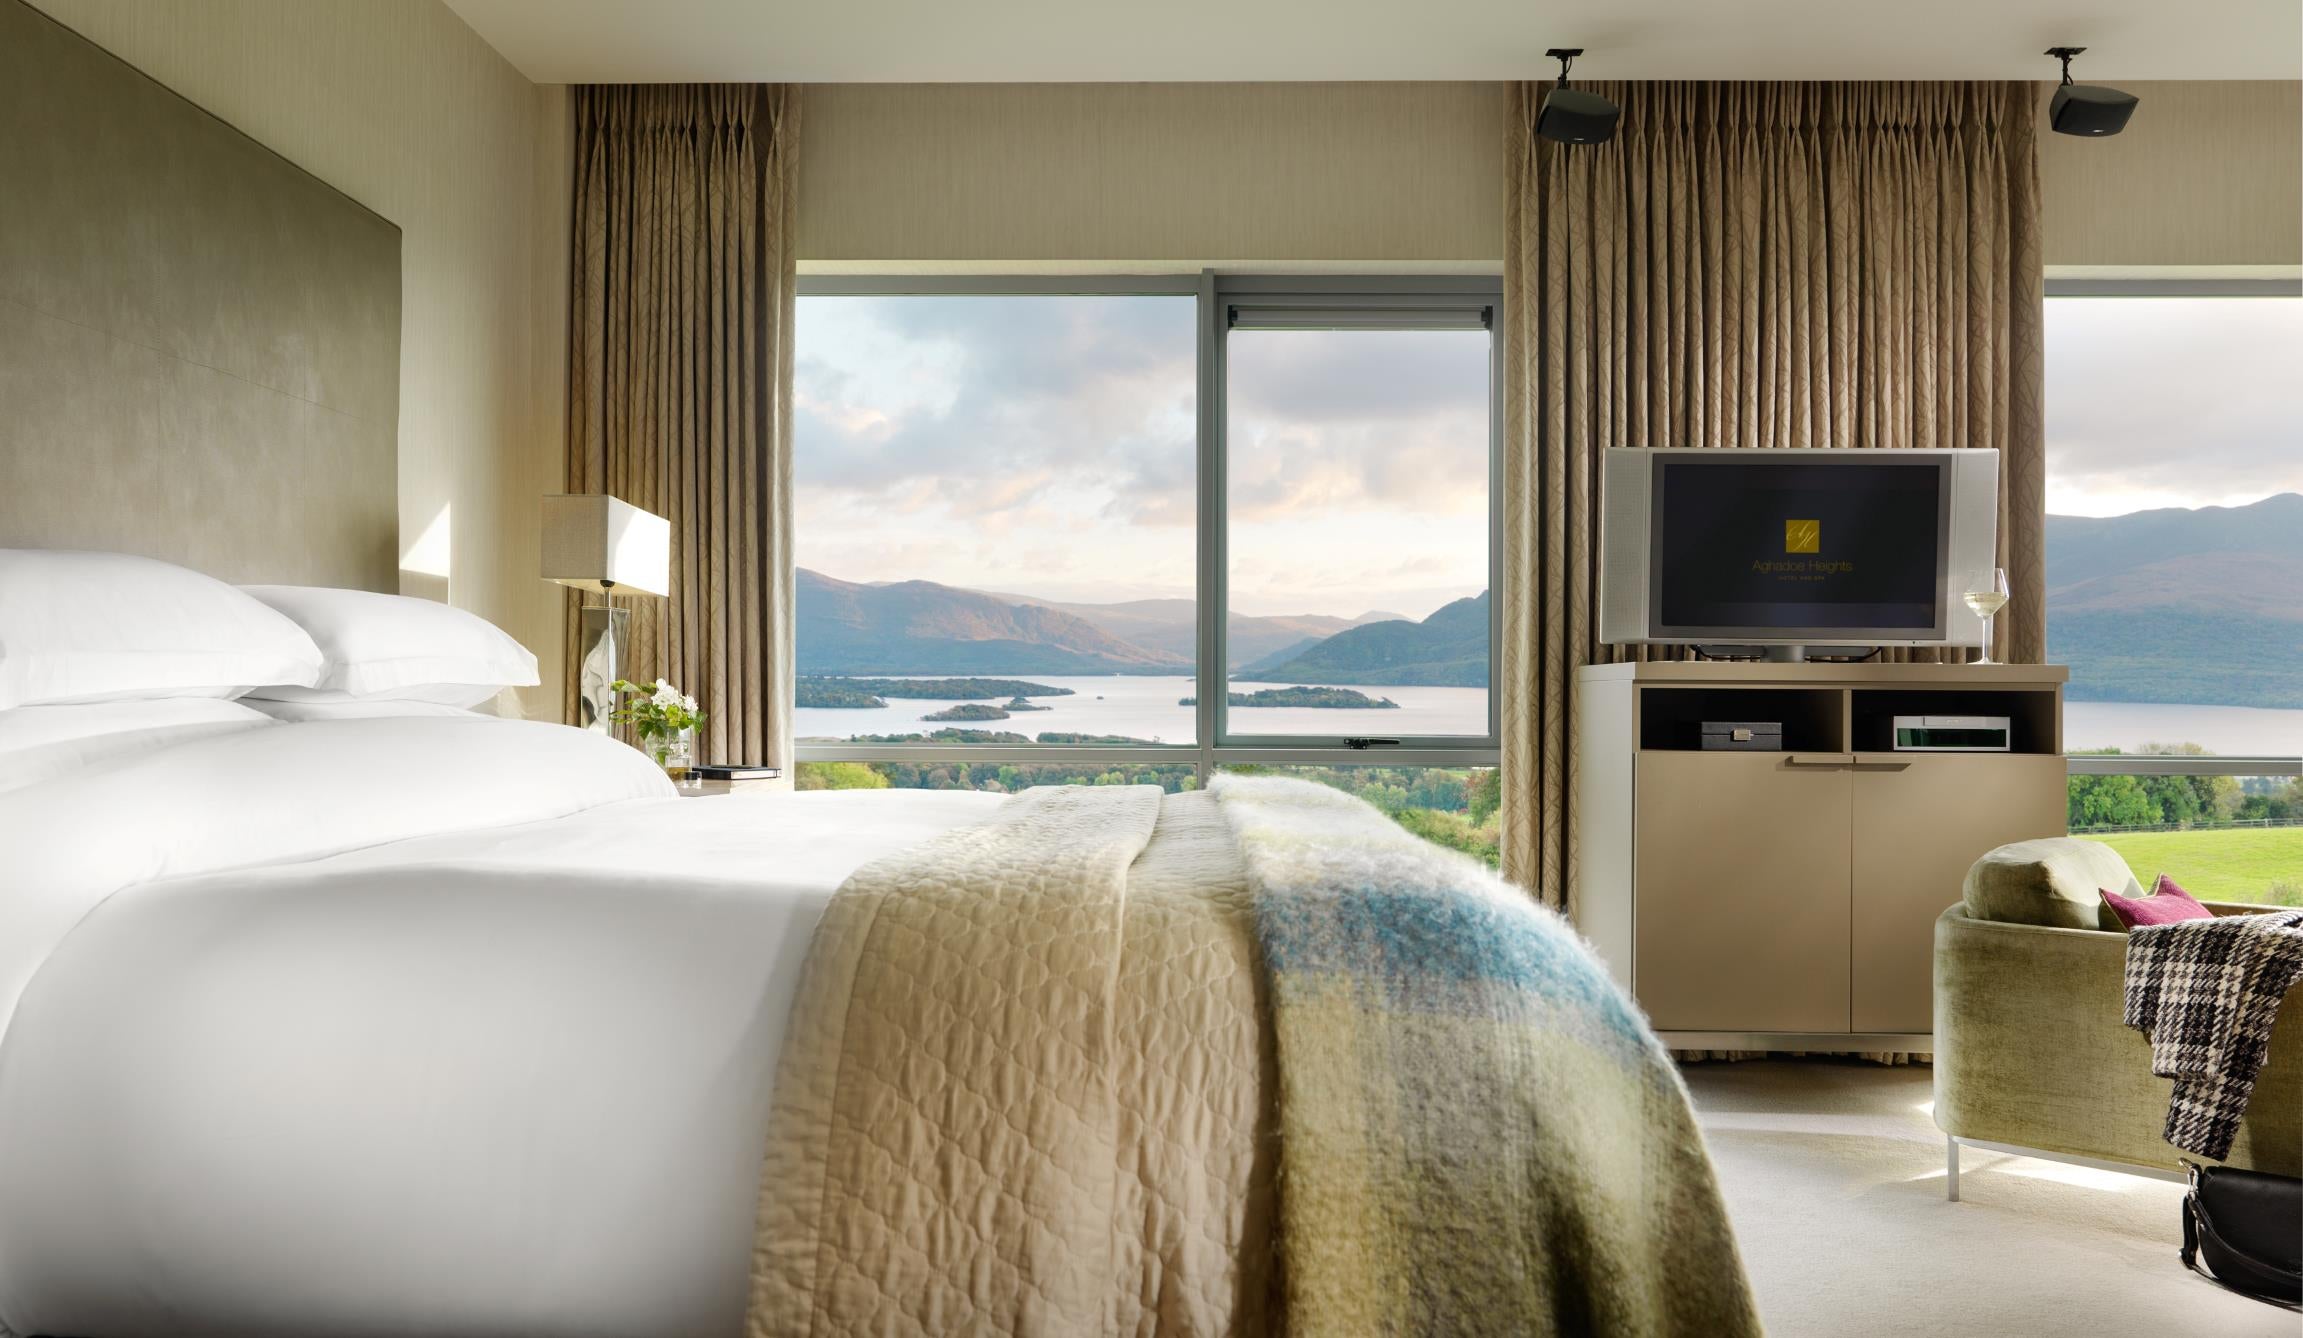 Bedroom in the luxury Aghadoe Heights Hotel and Spa in Ireland.